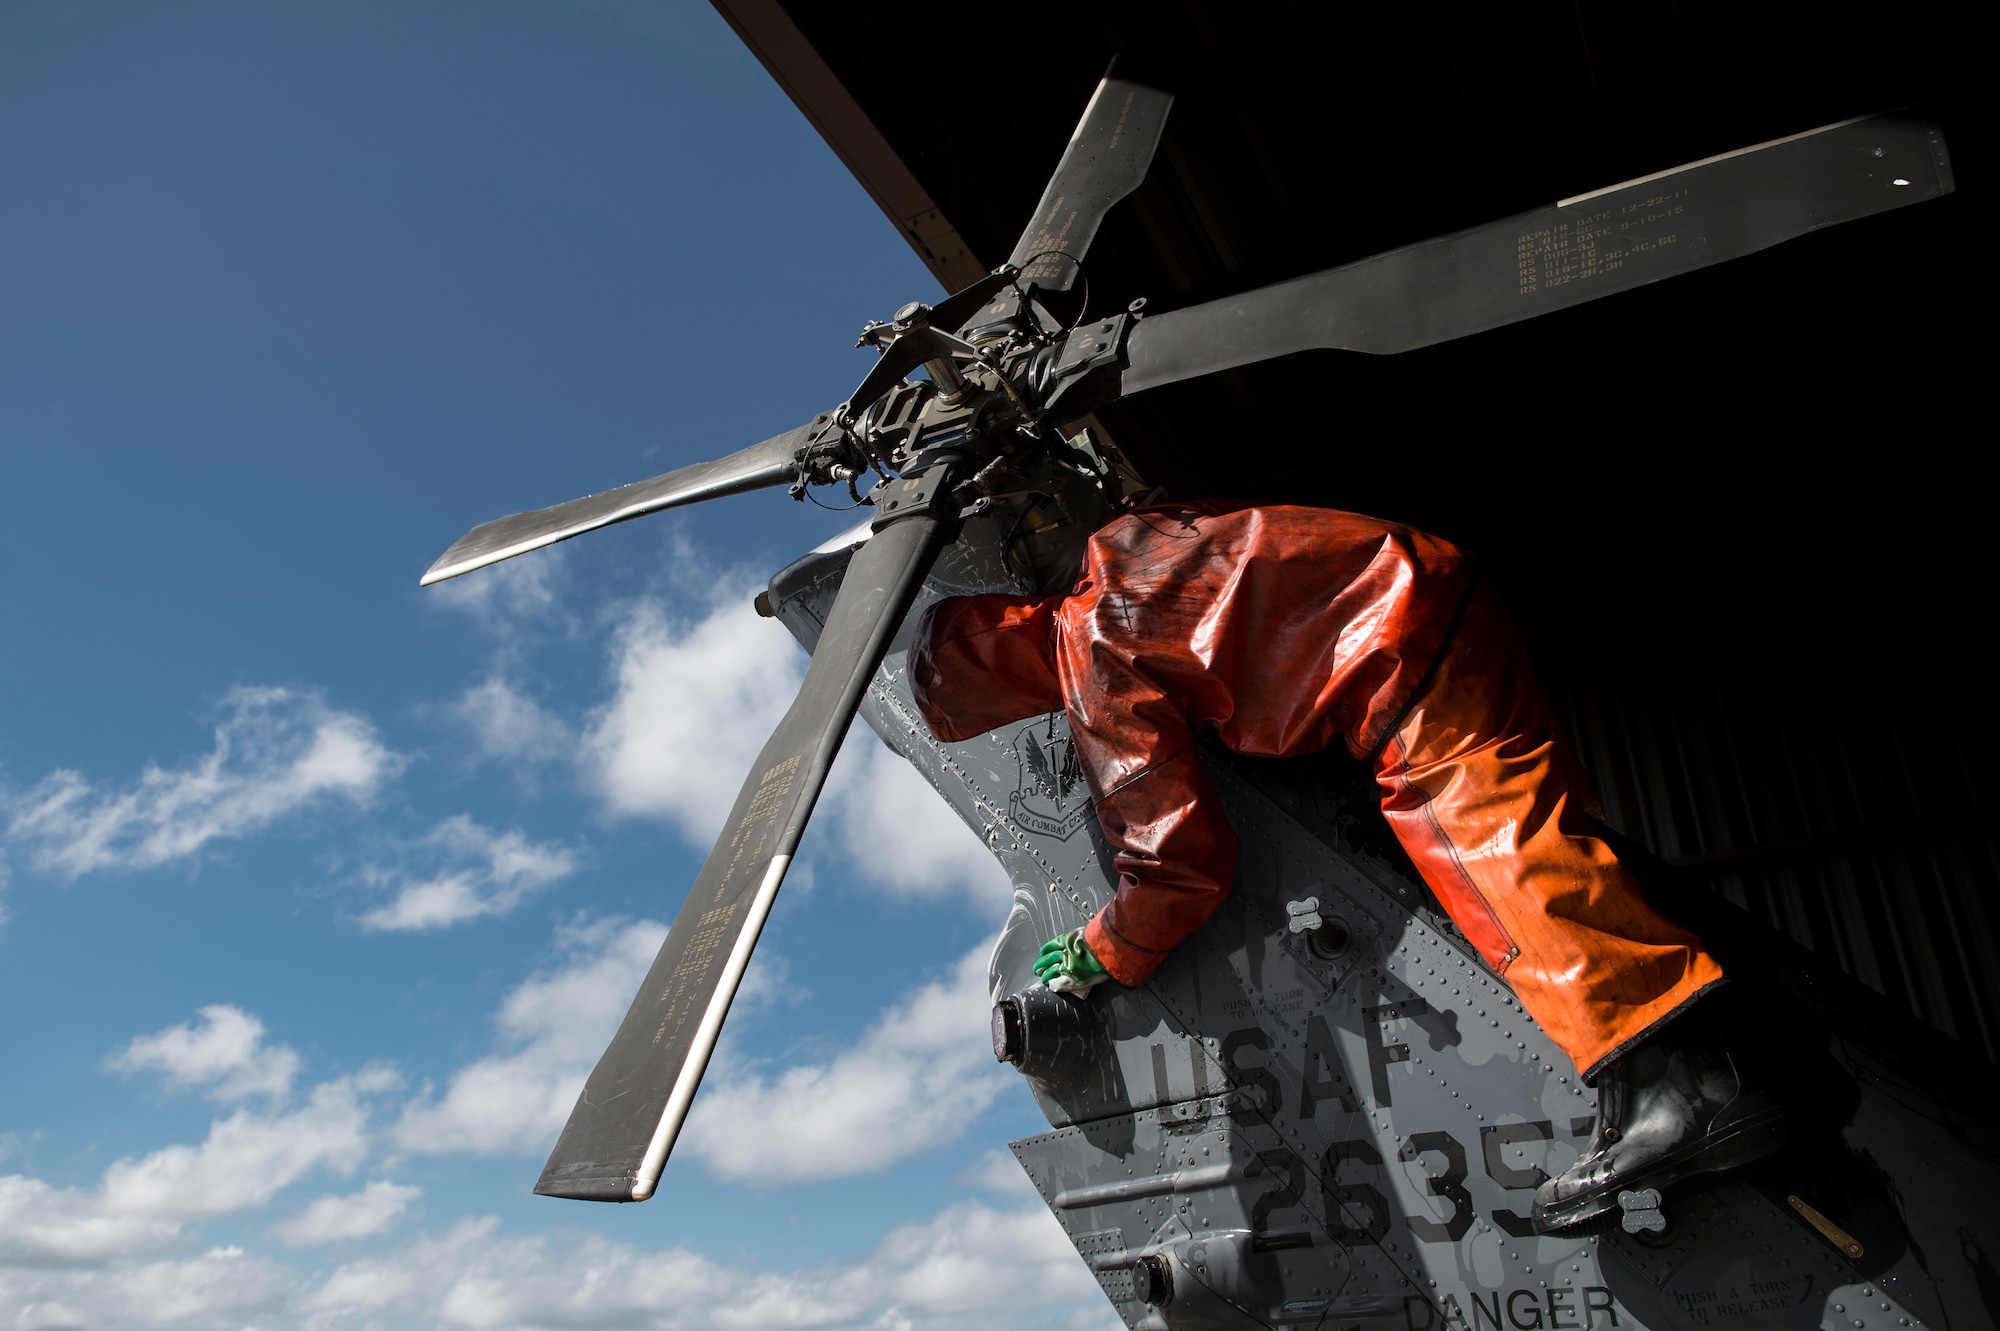 Senior Airman Bradley Simmons, 41st Helicopter Maintenance Unit crew chief, scrubs the rudder of an HH-60G Pave Hawk, Feb. 20, 2018, at Moody Air Force Base, Ga. Airmen are required to wash the helicopters every 180 days to control corrosion caused by oil, dirt and grime. Washing paired with mechanical and electrical maintenance help Airmen ensure the Pave Hawks are ready at a moment’s notice. (U.S. Air Force photo by Senior Airman Janiqua P. Robinson)